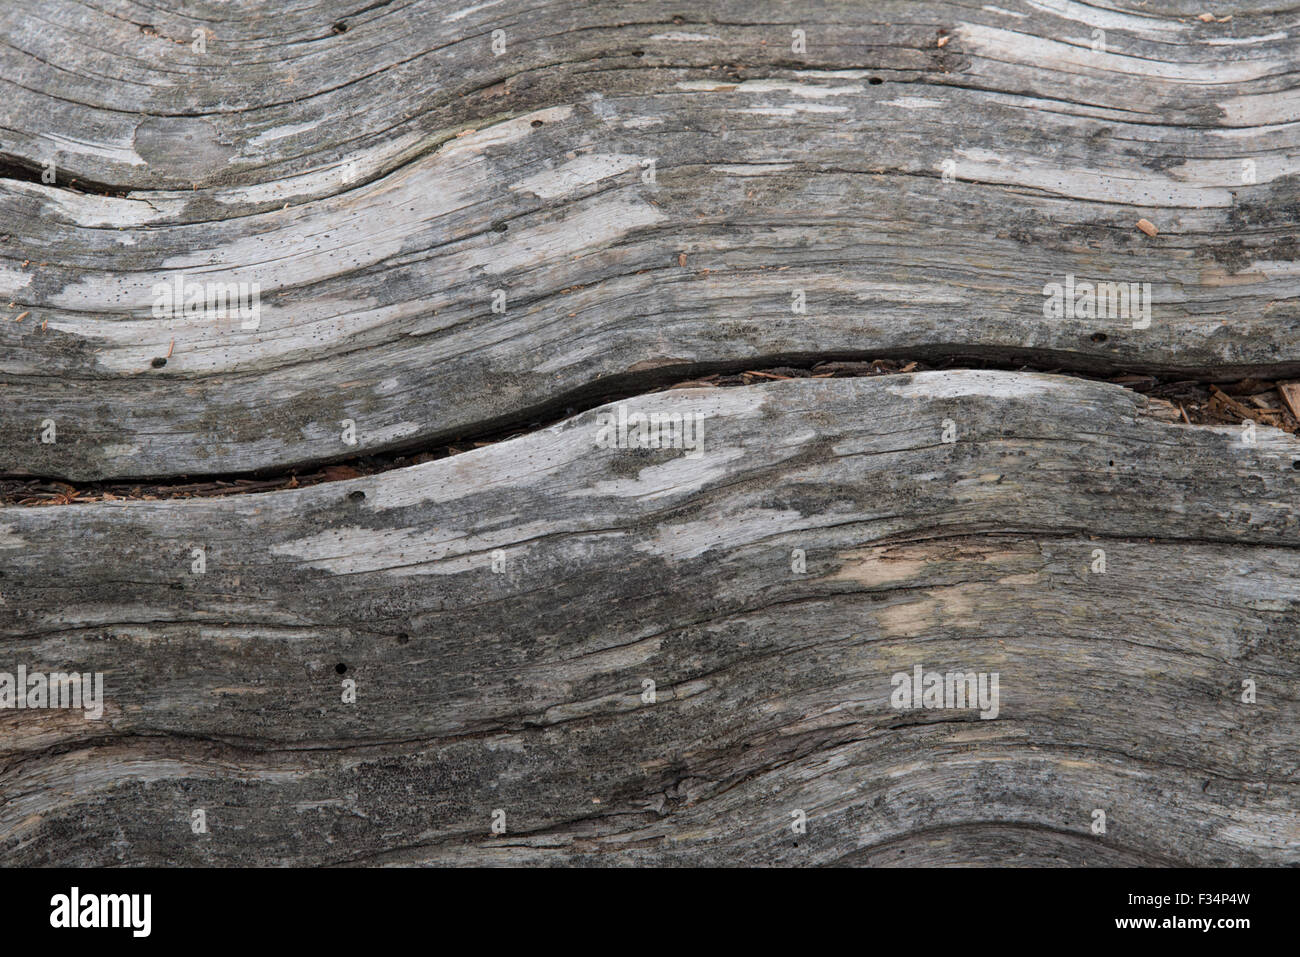 Detail of a Lodgepole Pine (Pinus contorta) tree log, showing wavy lines in the wood.  Makes a good background image. Stock Photo